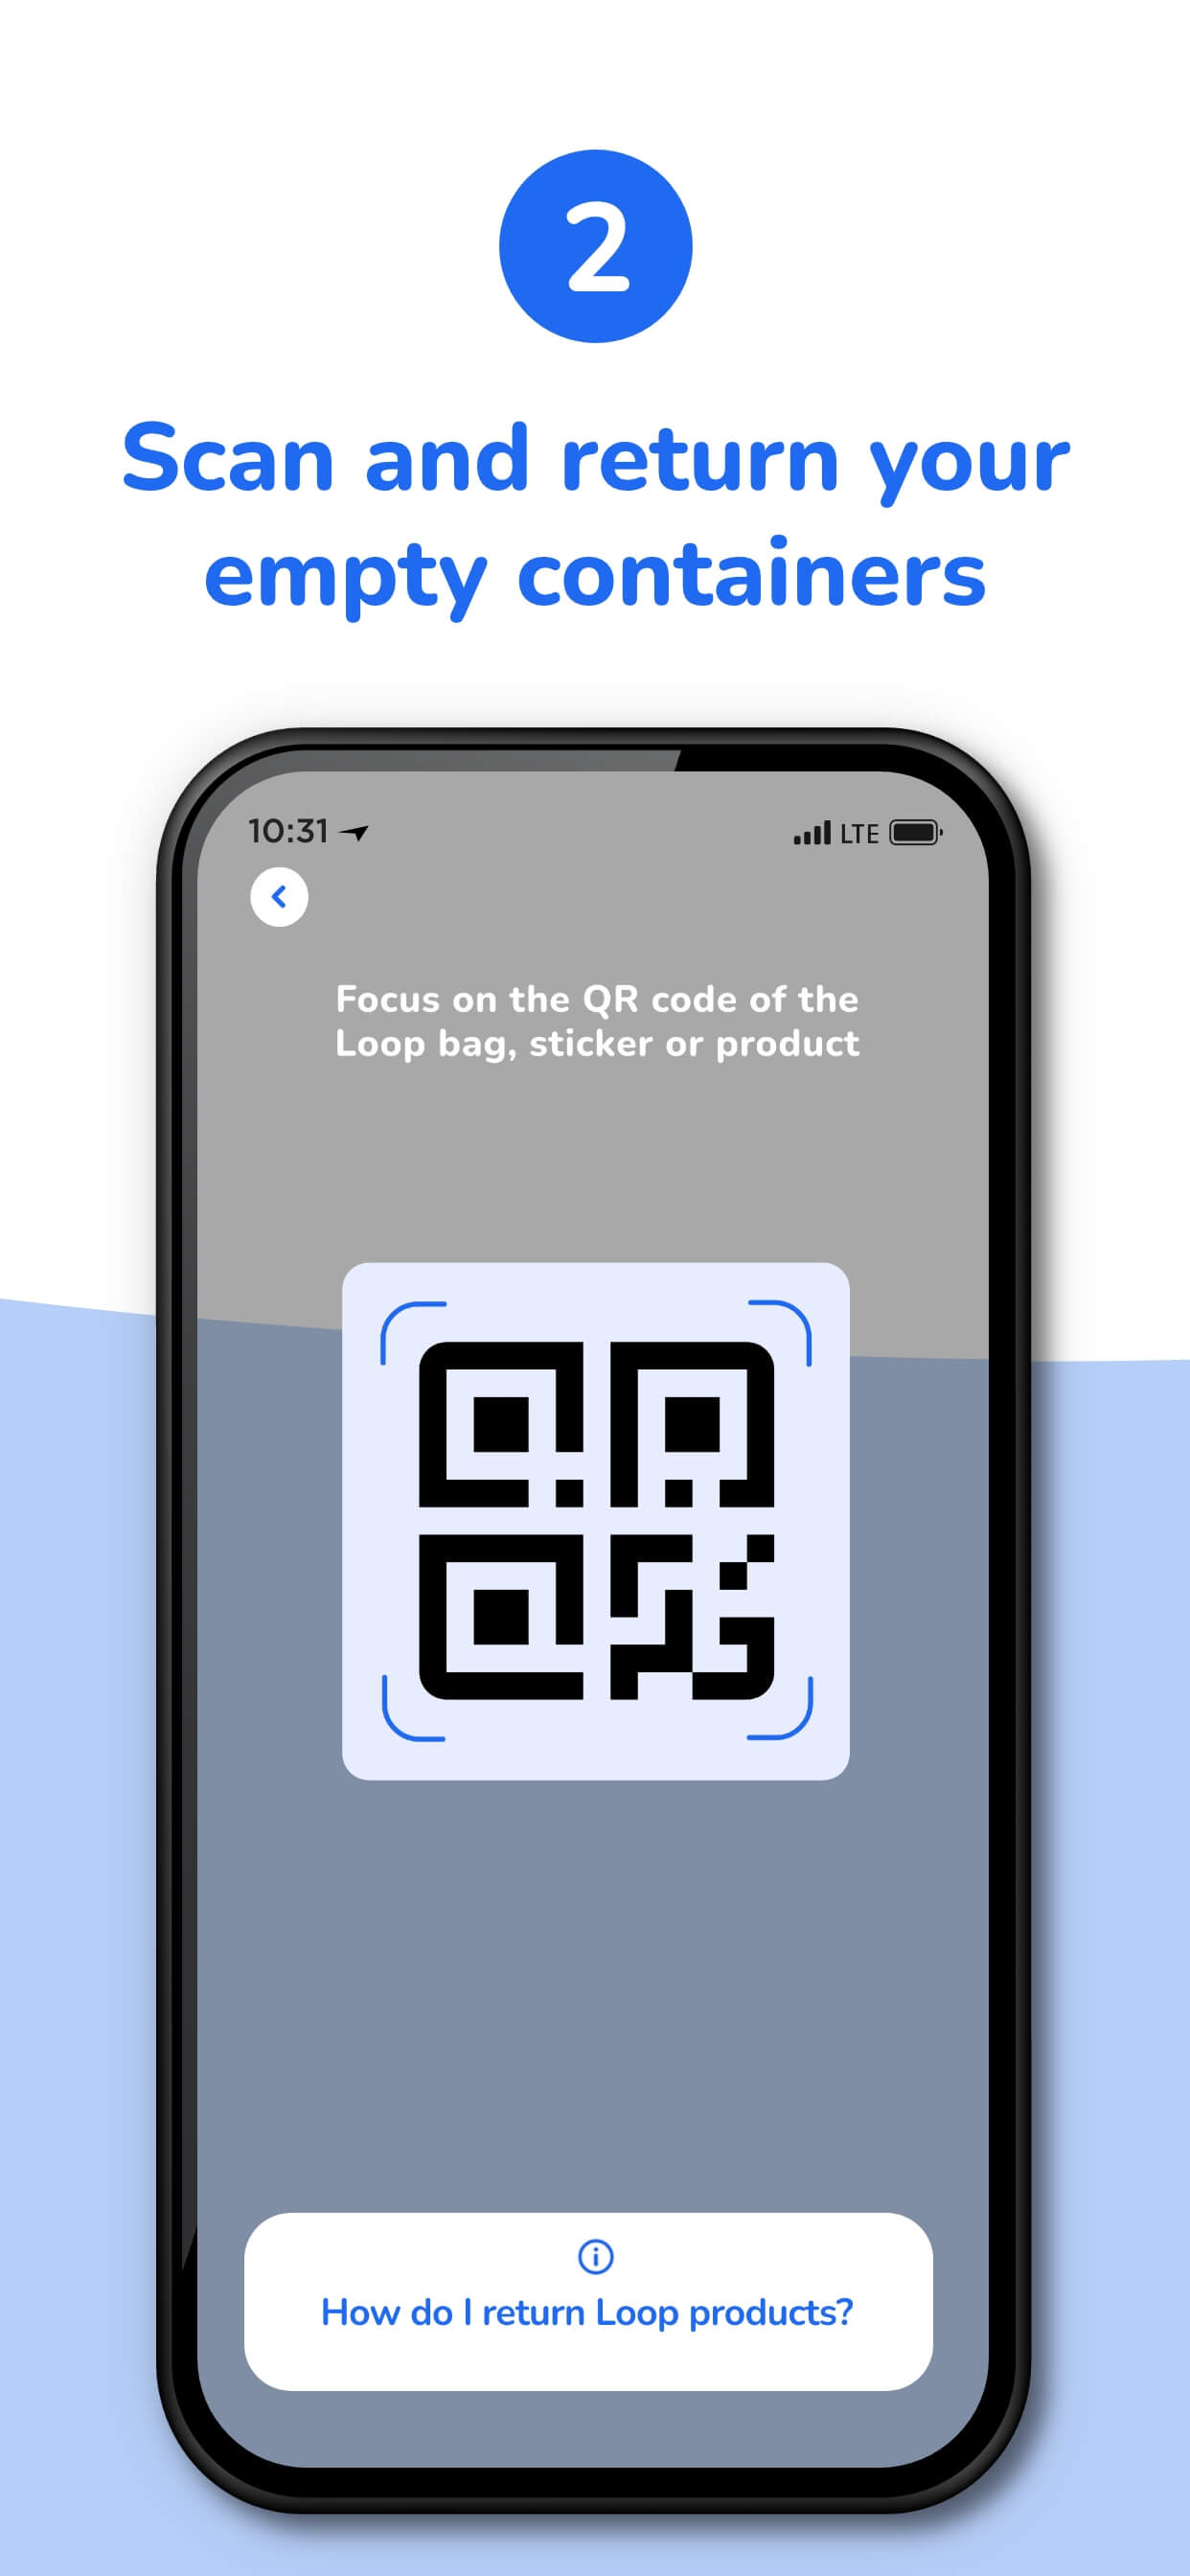 Scan the QR code on the container